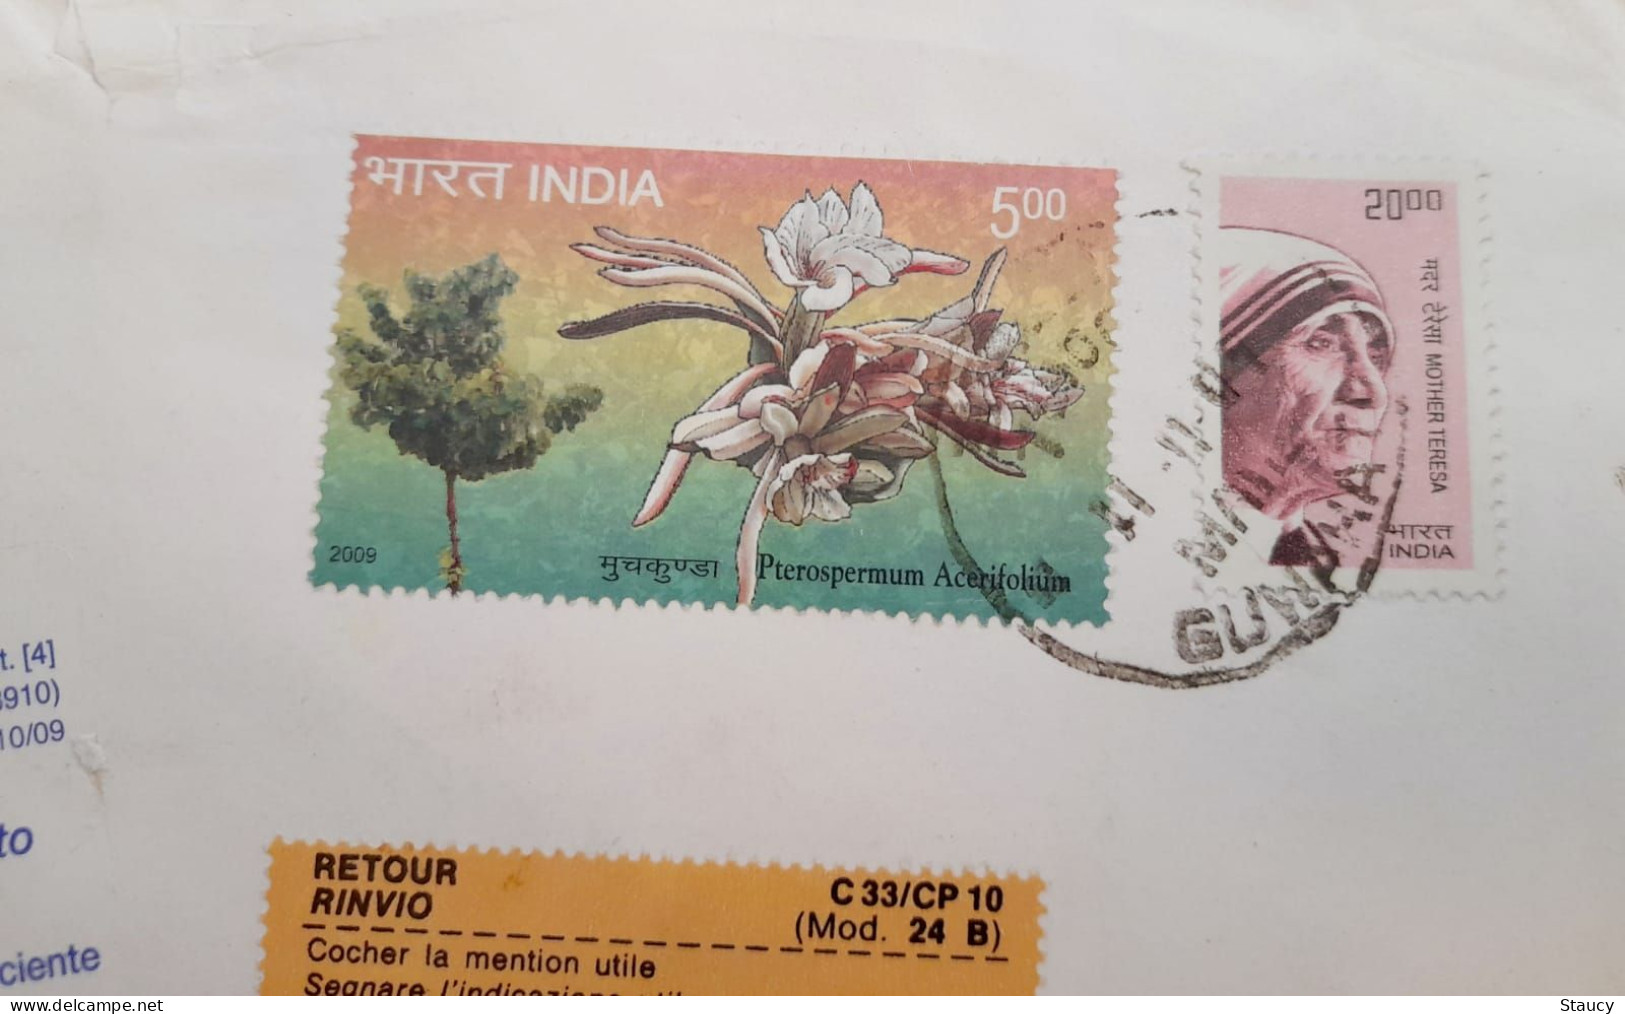 INDIA 2009 RETURN TO SENDER LABEL, AIR MAIL COVER TO SWITZERLAND, 2 STAMPS - MOTHER TERESA + FLOWERS, GUWAHATI - Luftpost